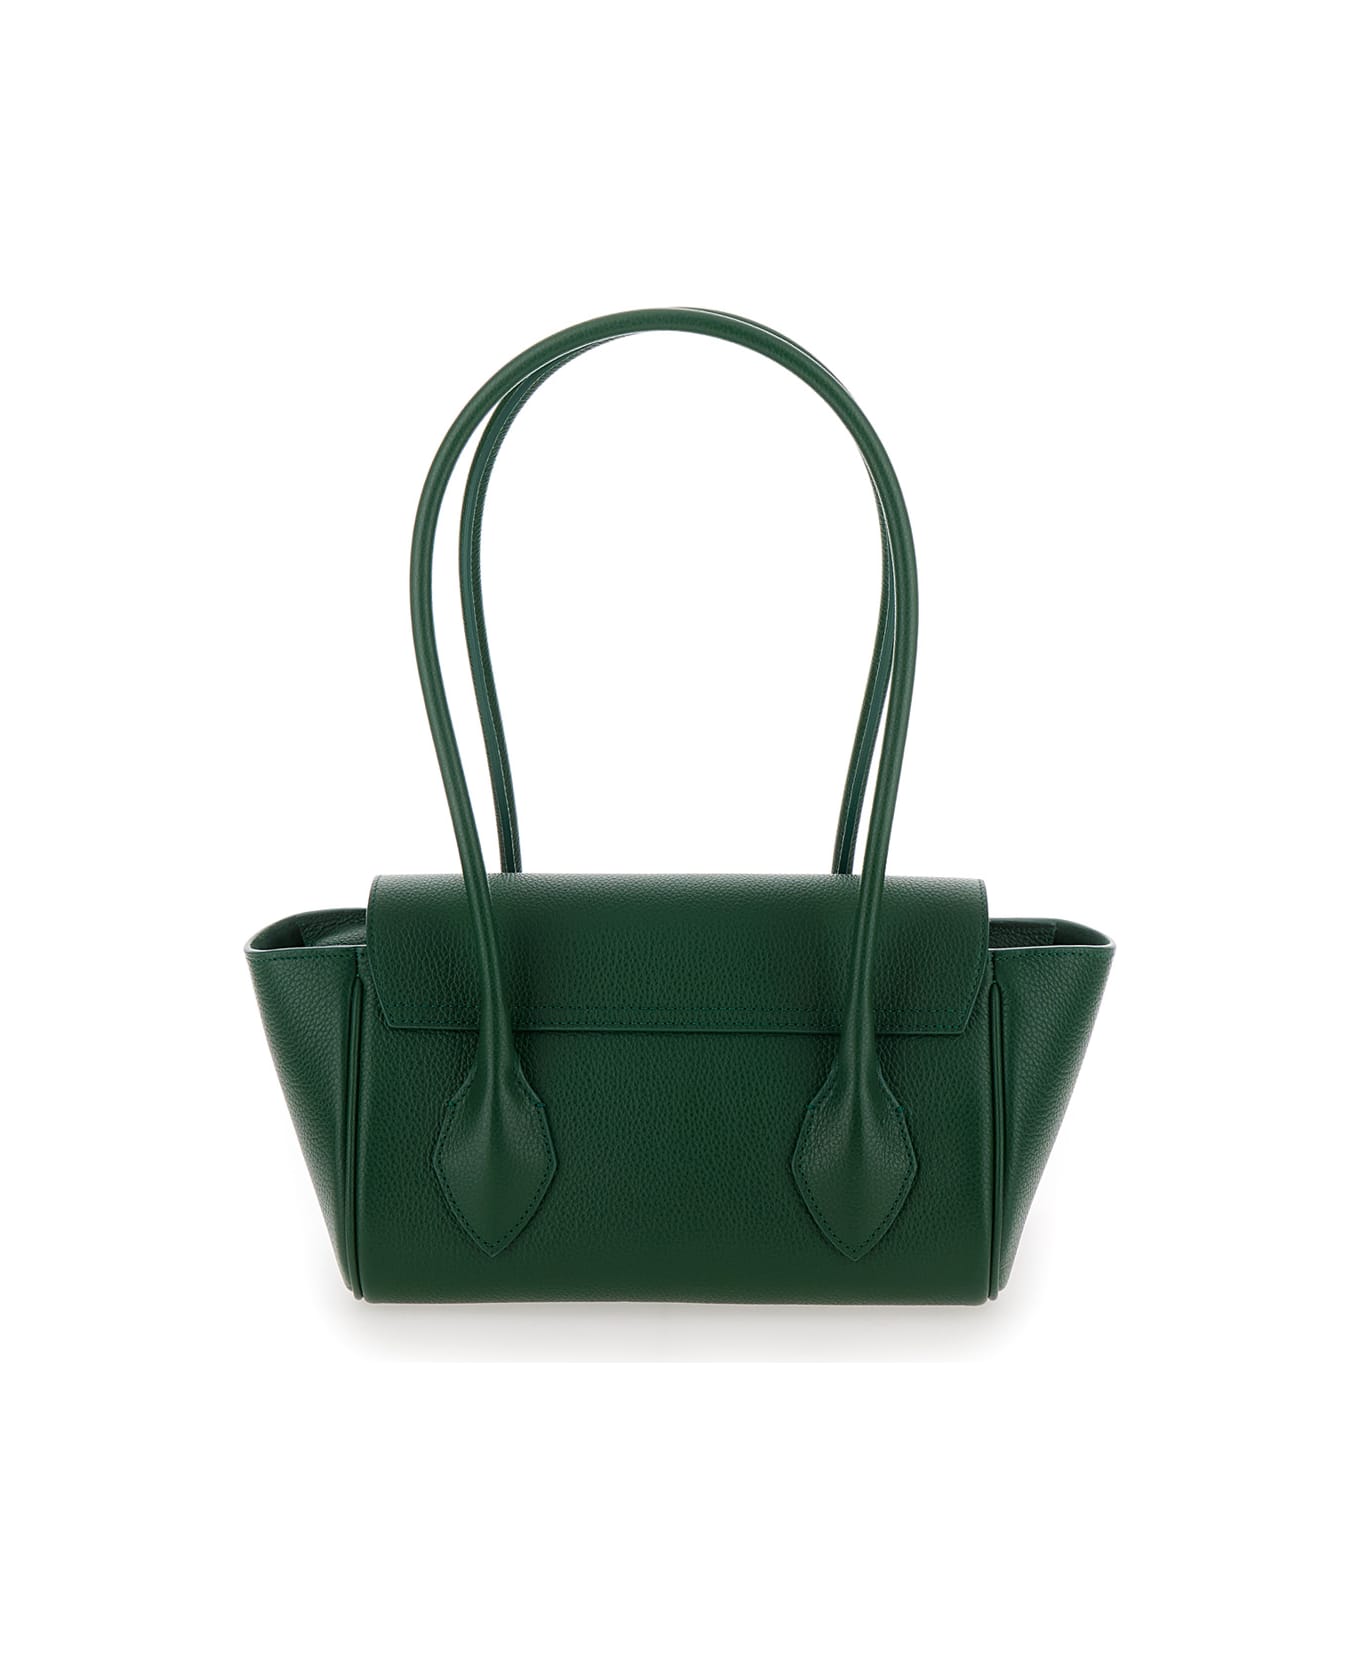 Ferragamo 'east-west S' Green Handbag With Logo Detail In Hammered Leather Woman - Green トートバッグ